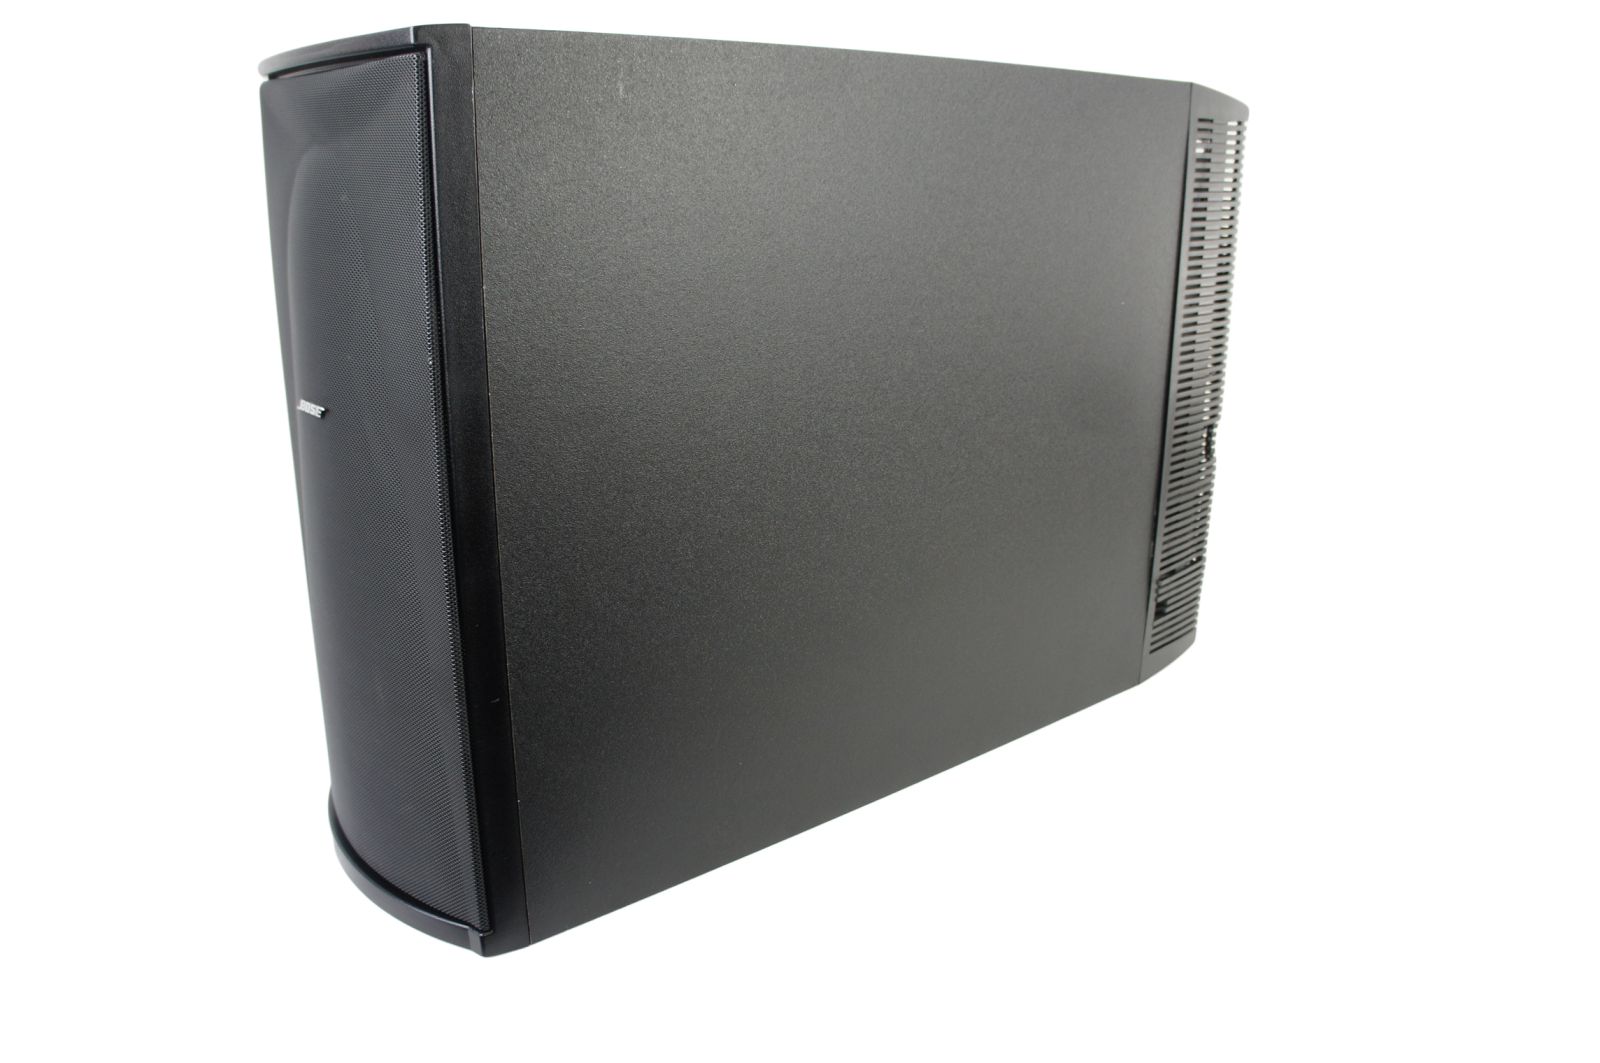 Bose_Lifestyle_38_PS38_PS_38_Powered_5.1_Subwoofer_07